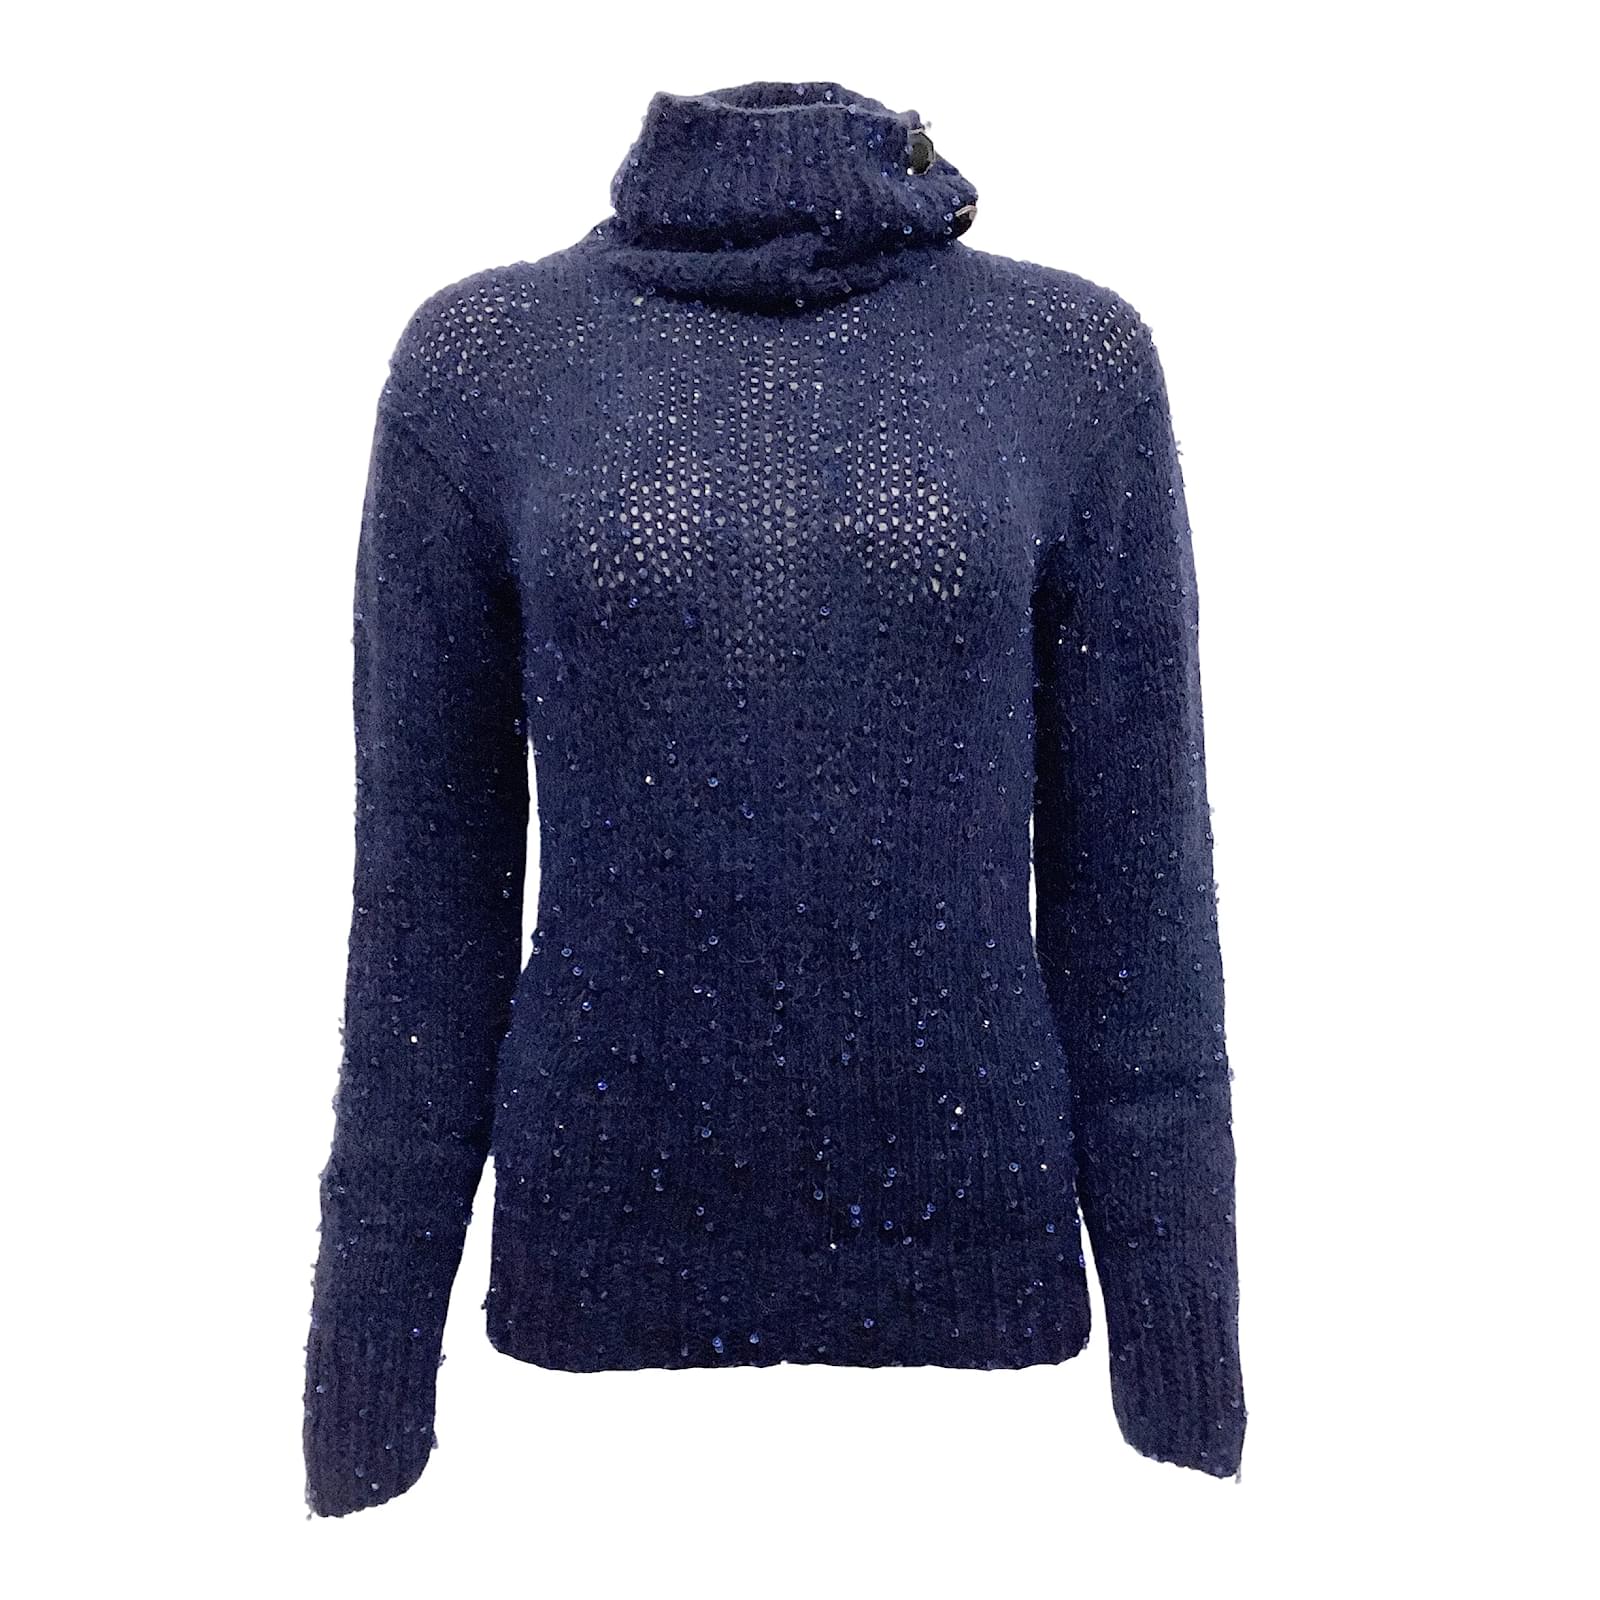 Knitwear Chanel Chanel Navy Blue Cashmere and Mohair Sweater with Sequins